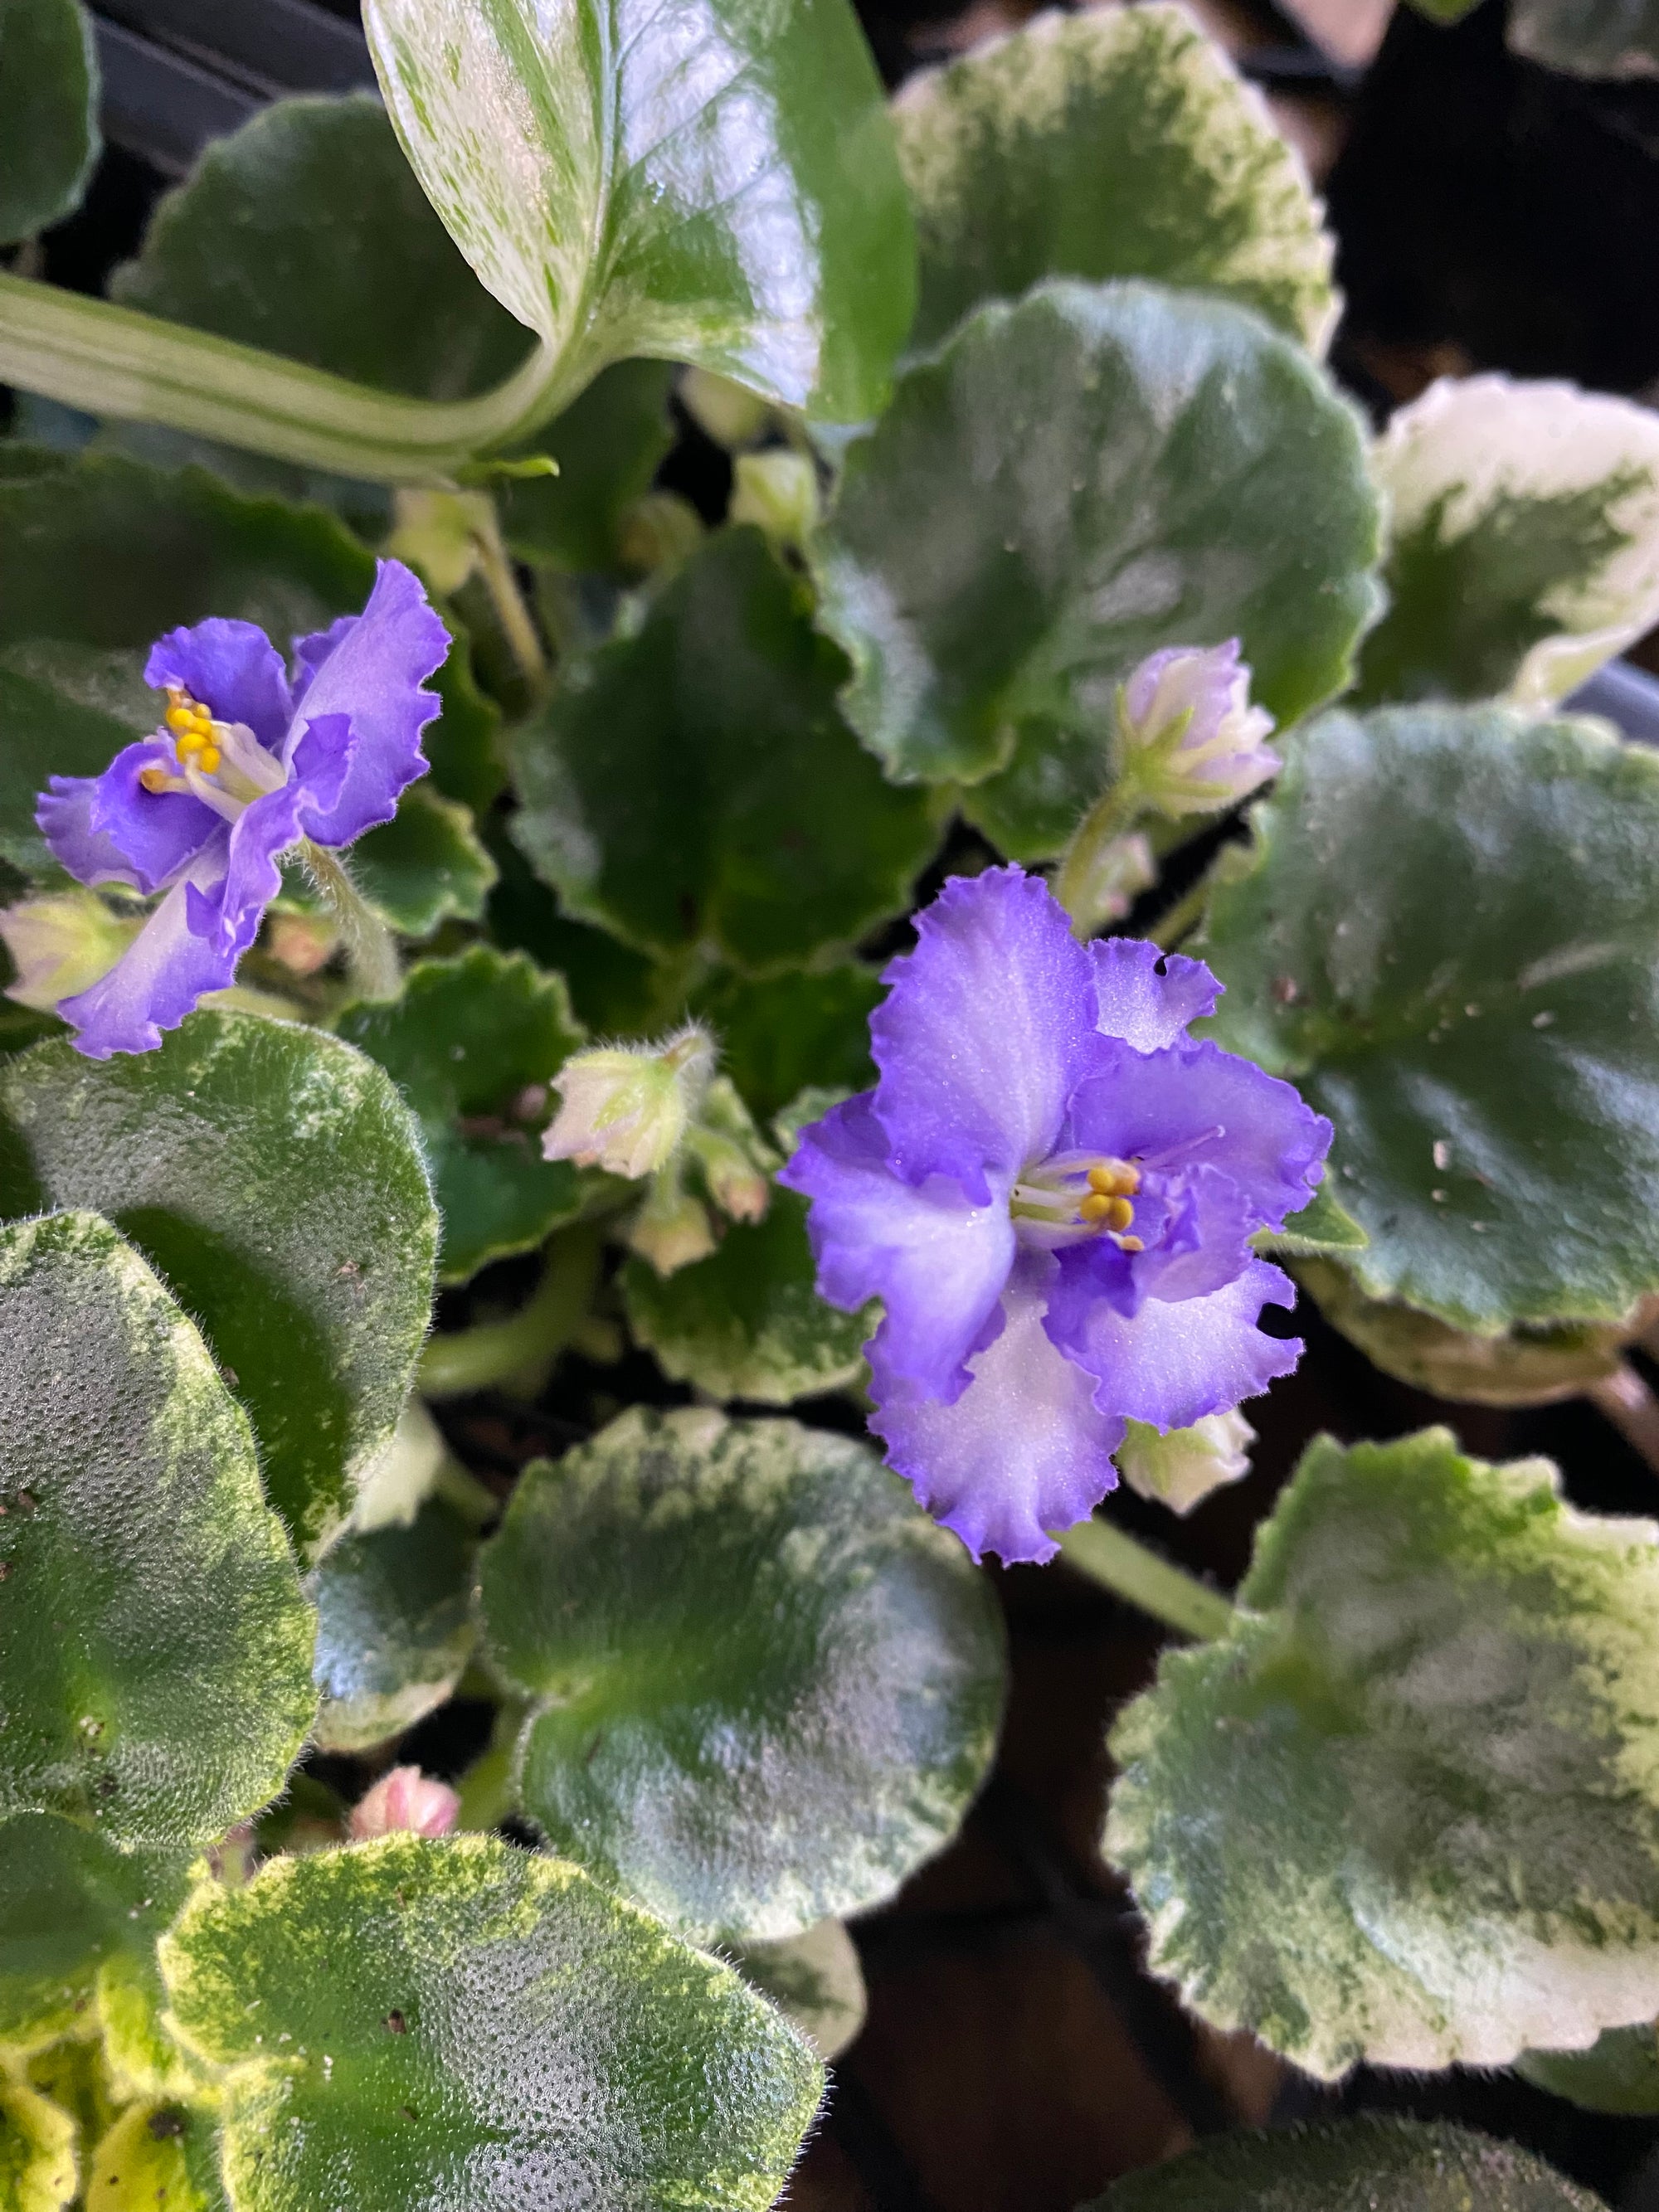 African Violet - Rob’s Kitten Caboodle (purple flower)